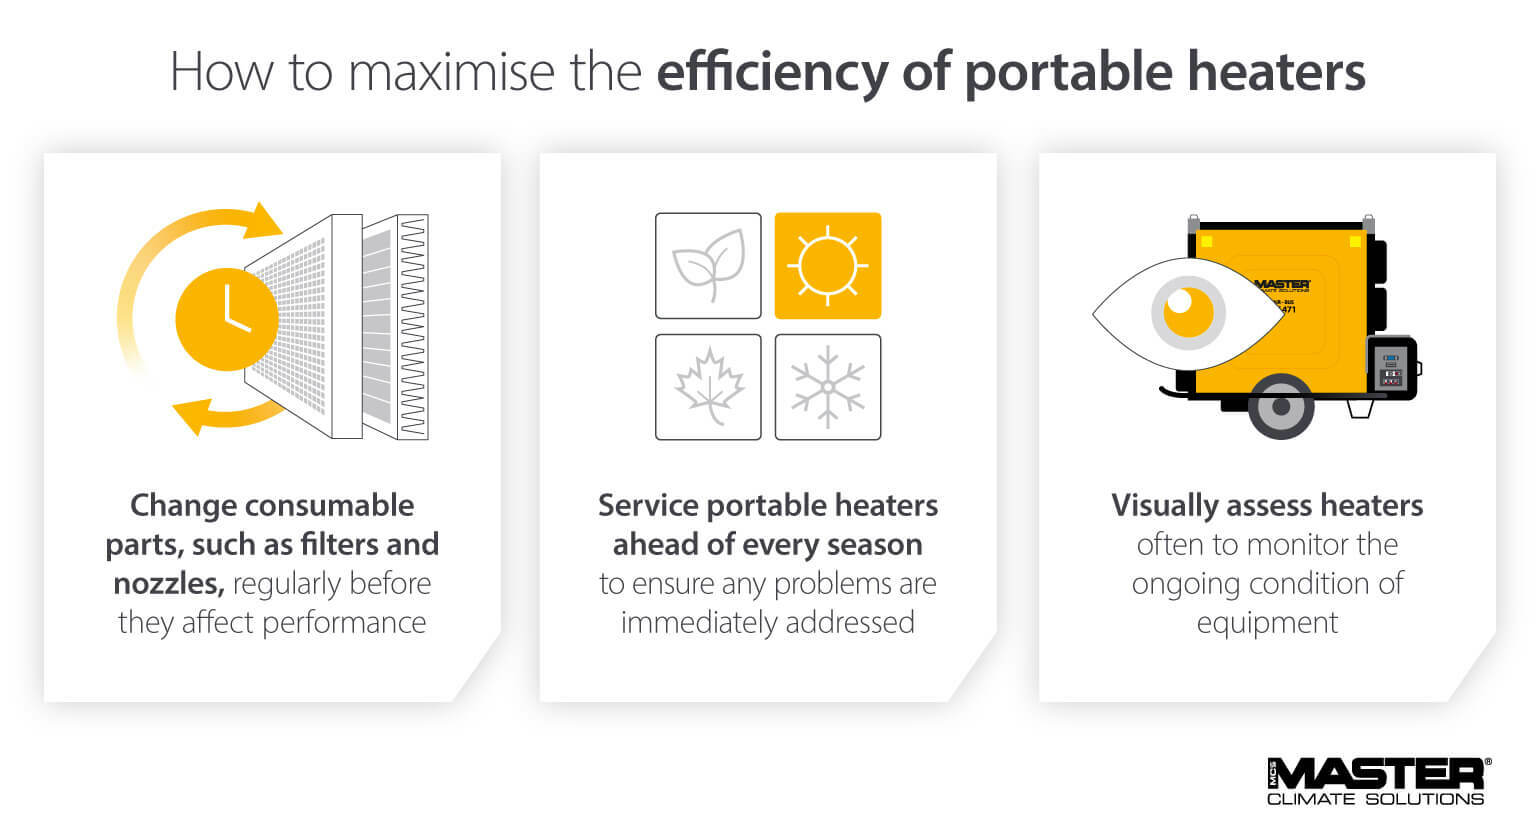 Methods to ensure portable heaters stay efficient through servicing and maintenance - Master infographic image